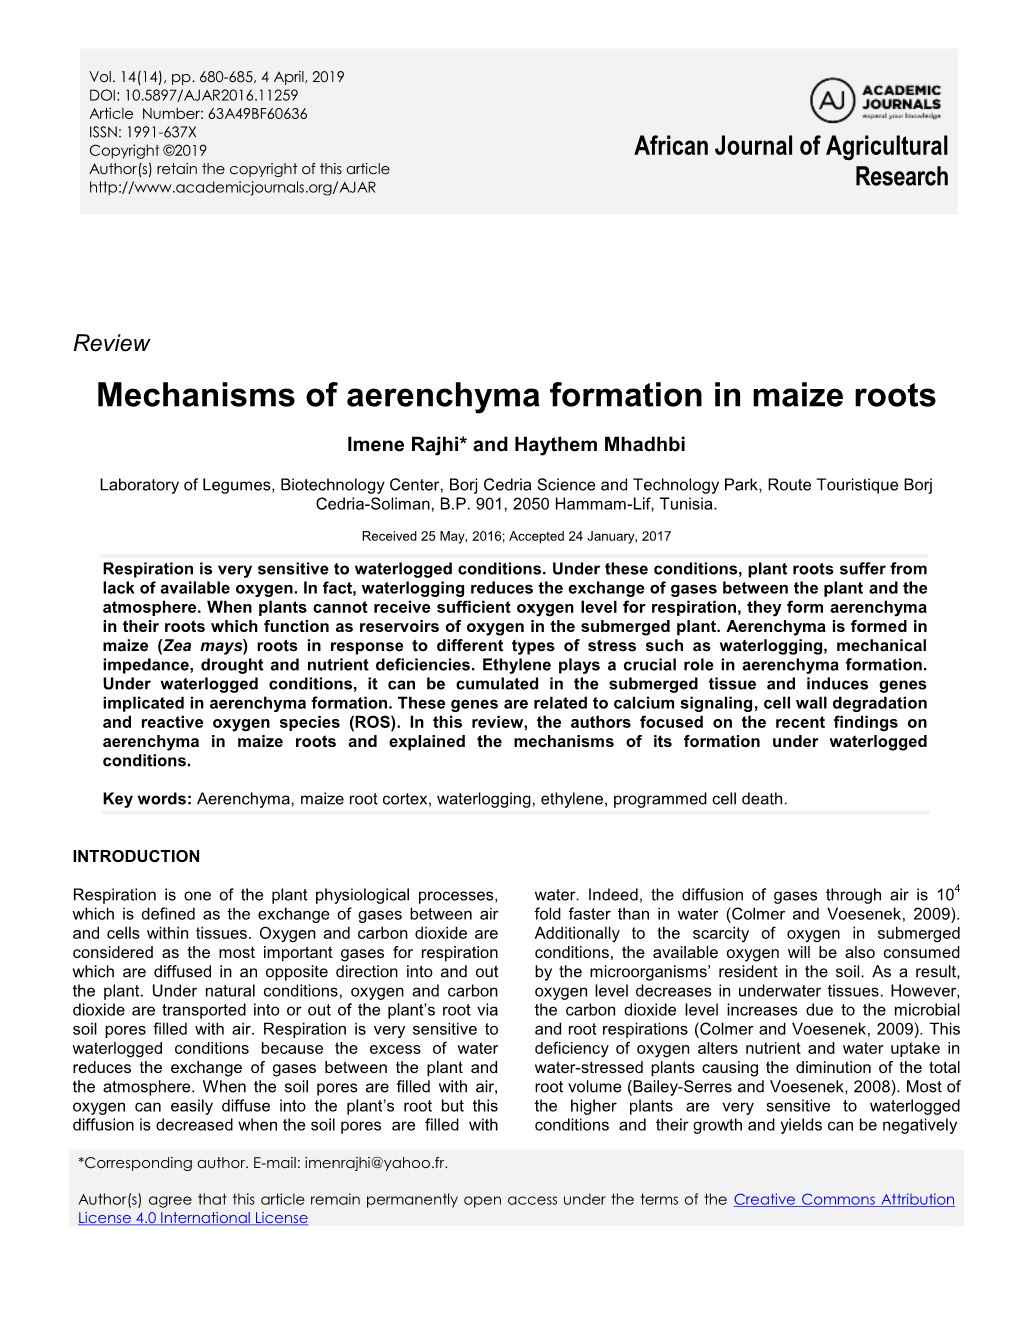 Mechanisms of Aerenchyma Formation in Maize Roots